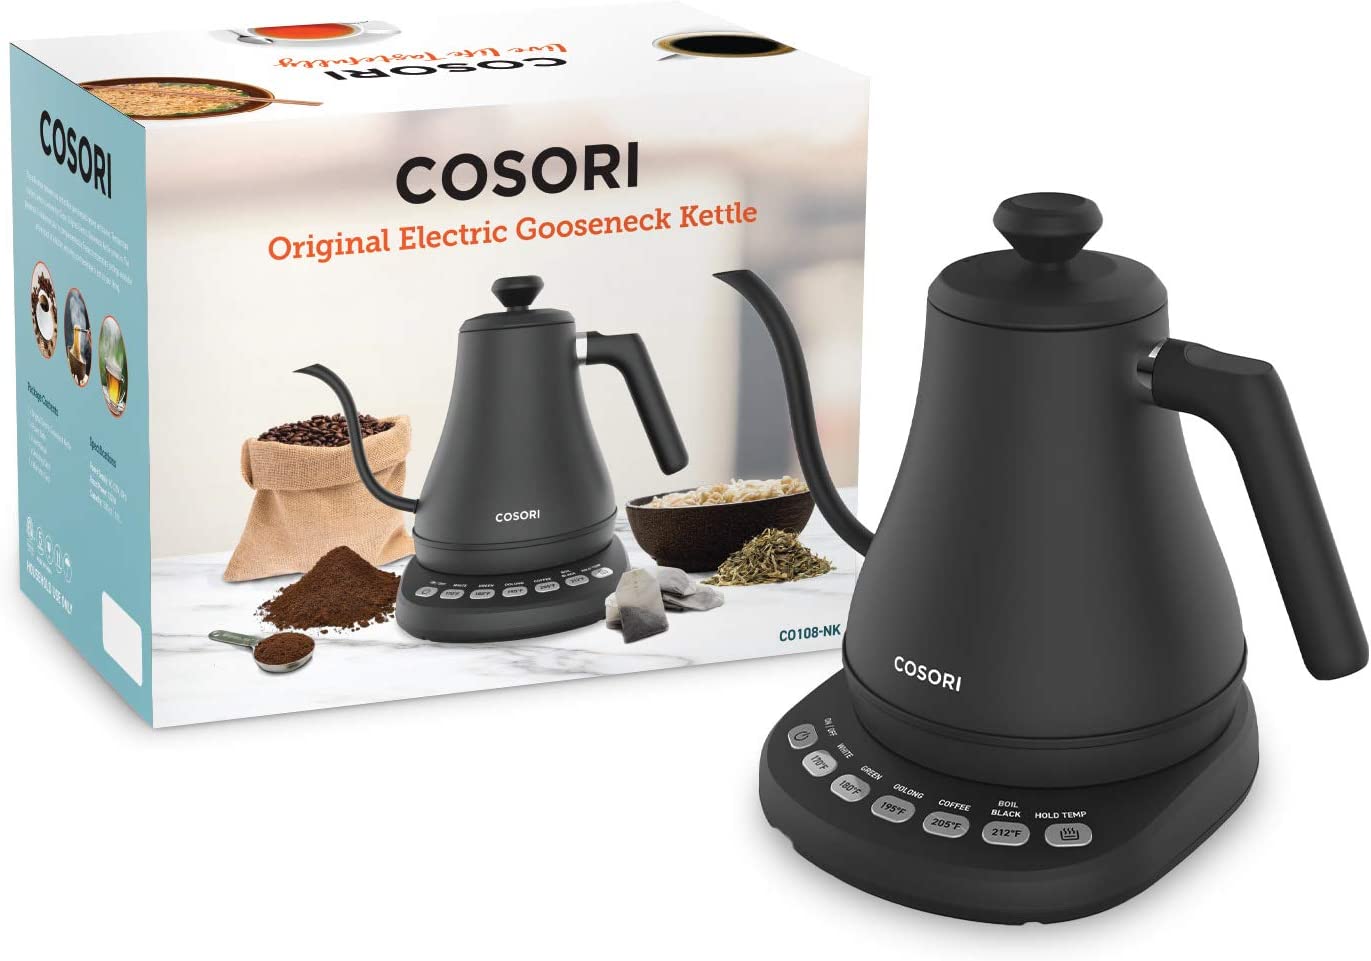 https://bigbigmart.com/wp-content/uploads/2023/05/COSORI-Electric-Gooseneck-Kettle-with-5-Variable-Presets-Pour-Over-Kettle-Coffee-Kettle-100-Stainless-Steel-Inner-Lid-Bottom-1200-Watt-Quick-Heating-0.8L-Matte-Black8.jpg